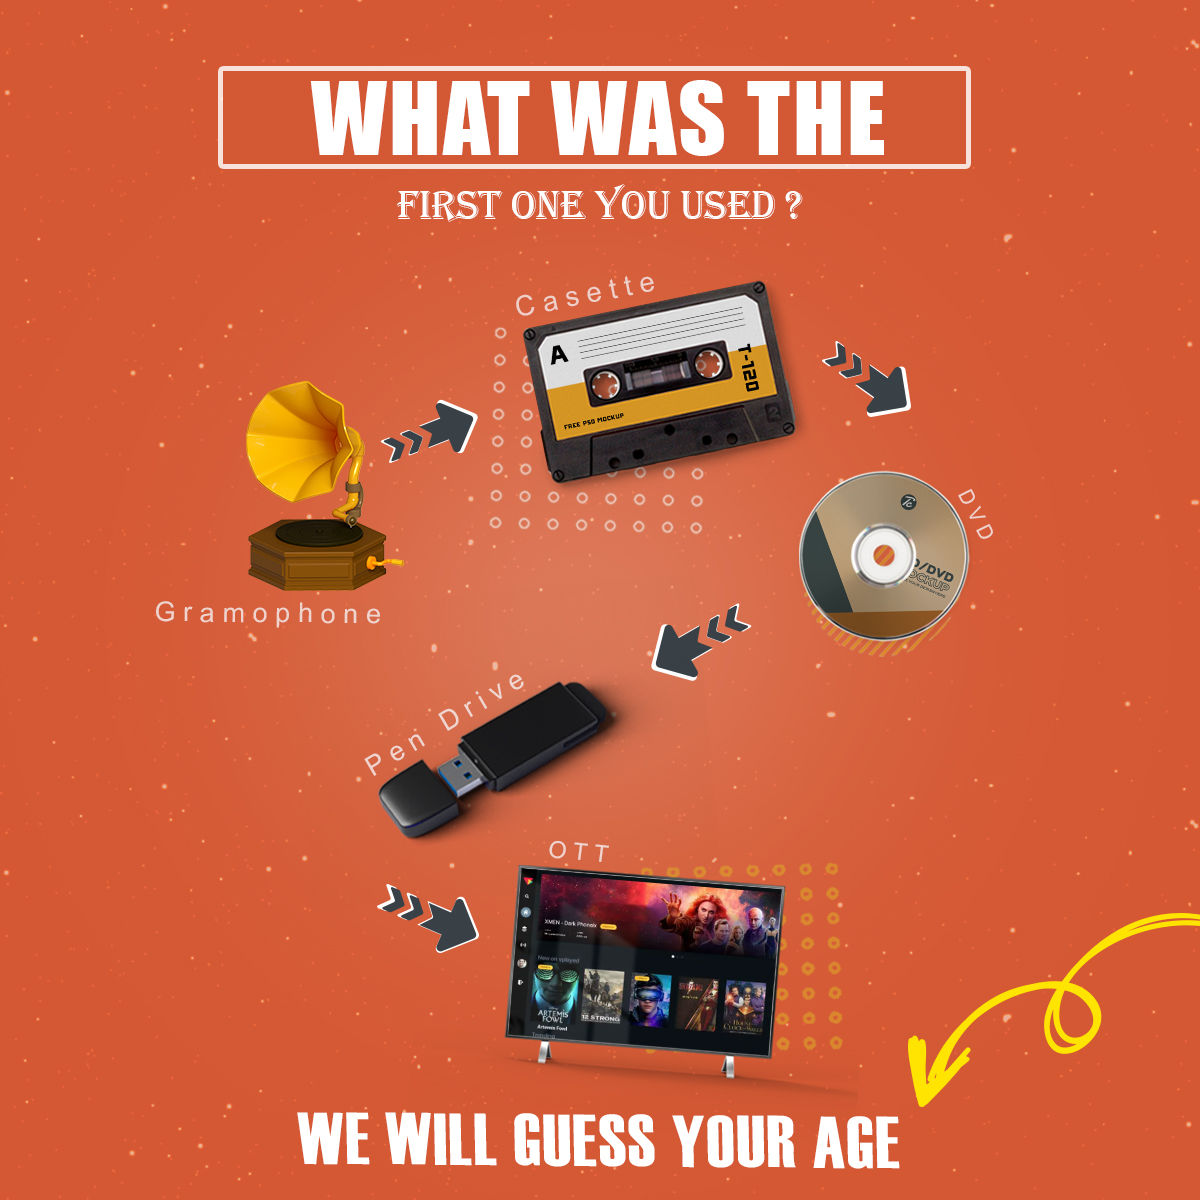 A quick flashback to your retro 90s to smart techy 2K days! Which blows up your mind. 
Drop us a comment, which can still win your hearts!

#retrodays #marketingideas #ottmemes #VPlayed #memepost #onlinevideoplatform #memesviral #rewinddays #retrodays #retrodevices #newtechnology